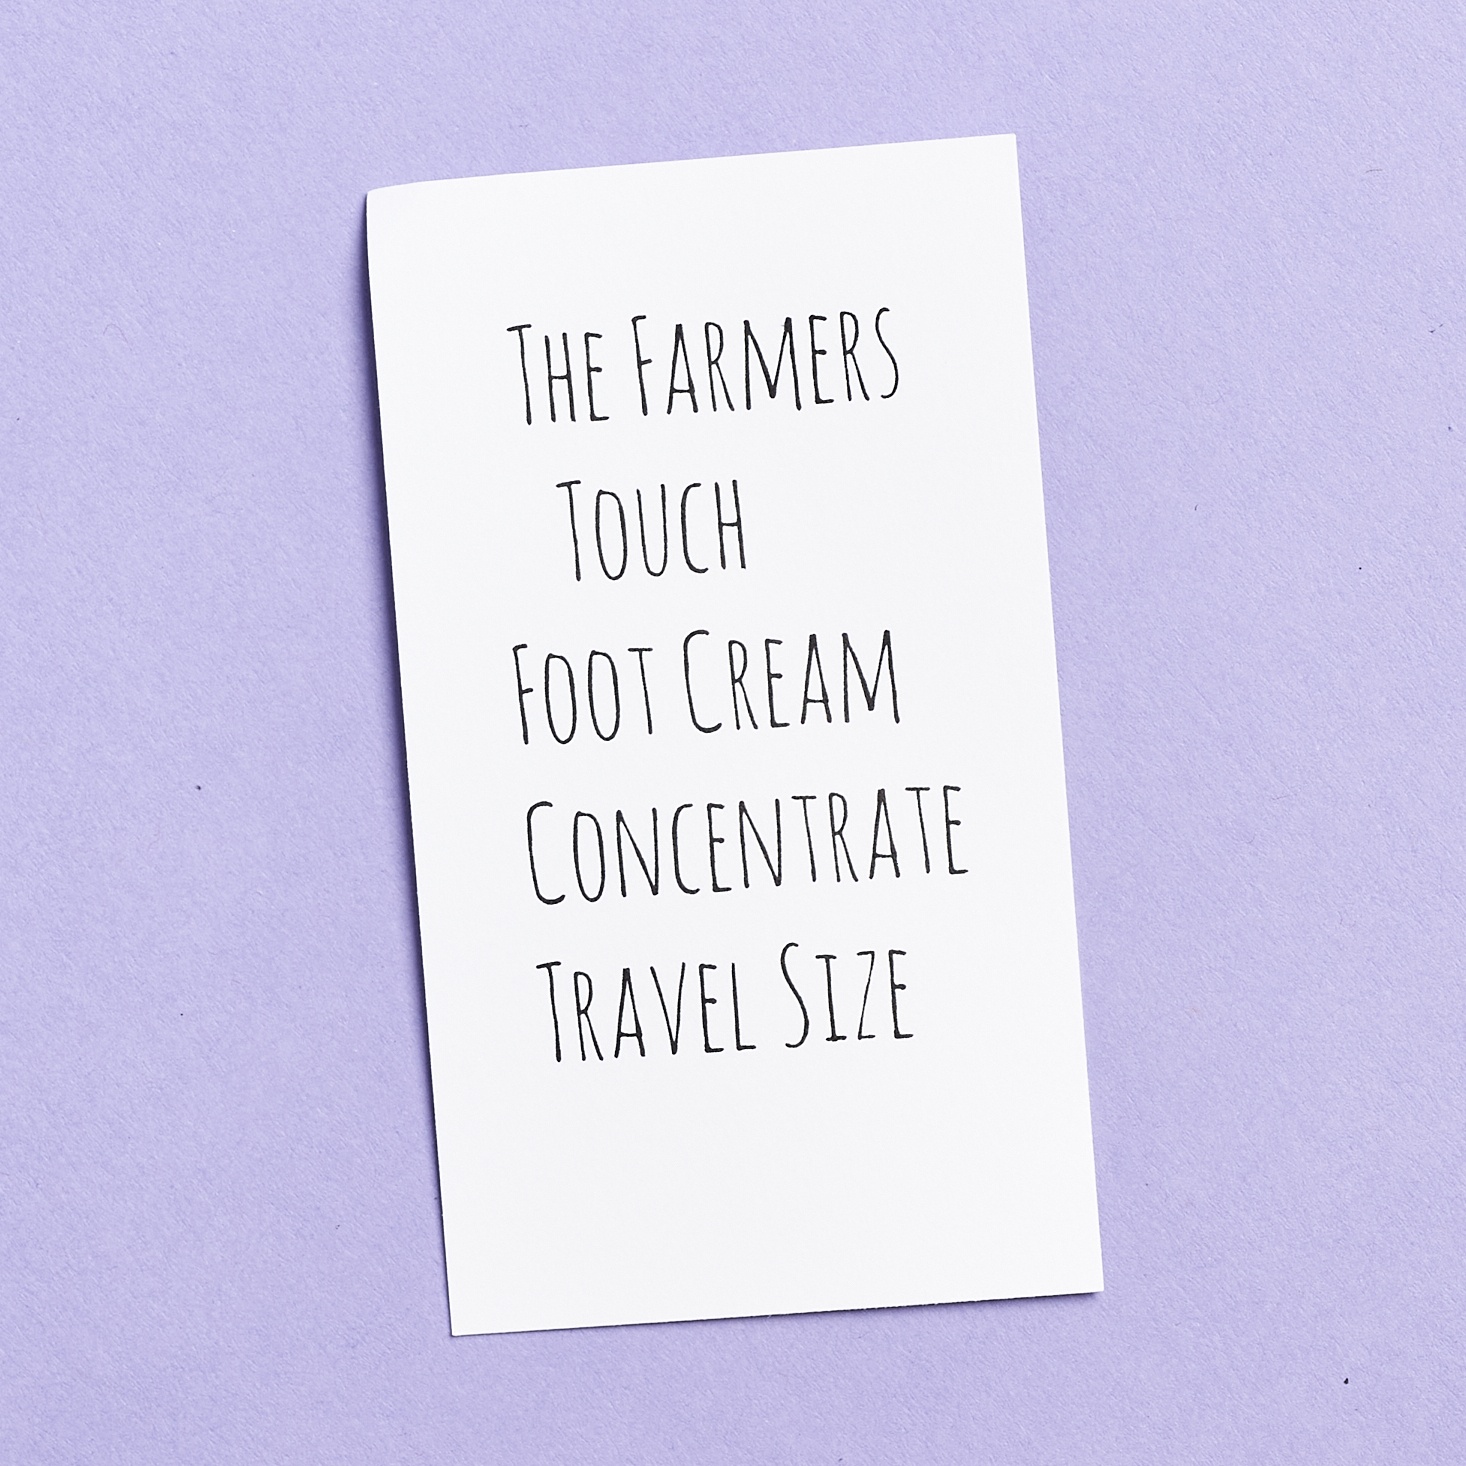 foot cream info from Earthlove April 2021